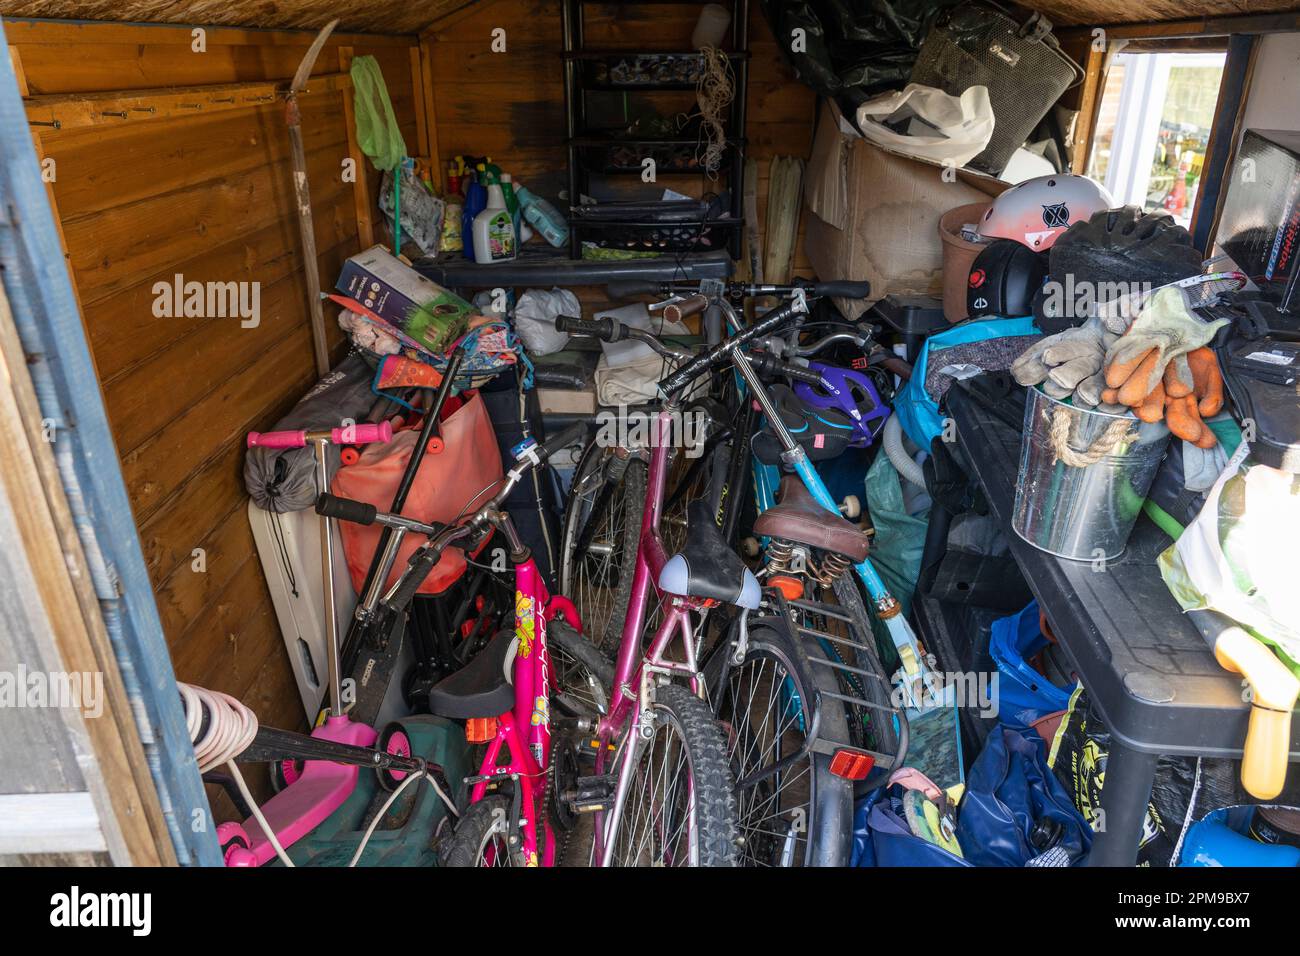 Time to get a new shed! Bikes, garden tools and general junk filling a shed in a UK house with no garage for storage. Theme: not enough storage Stock Photo